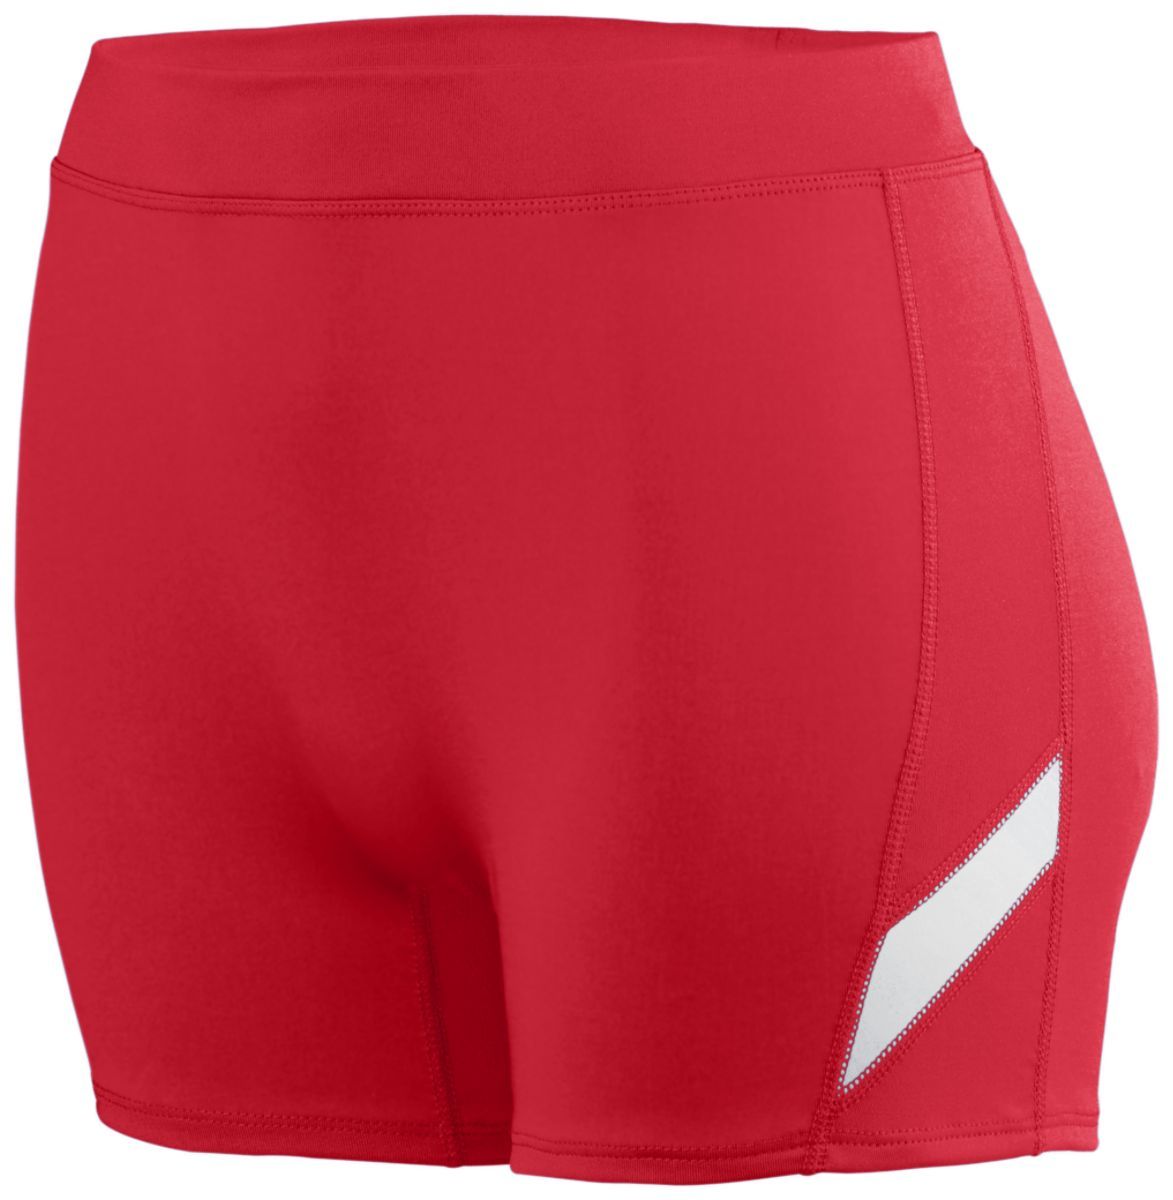 Augusta Sportswear Ladies Stride Shorts in Red/White  -Part of the Ladies, Ladies-Shorts, Augusta-Products, Volleyball product lines at KanaleyCreations.com